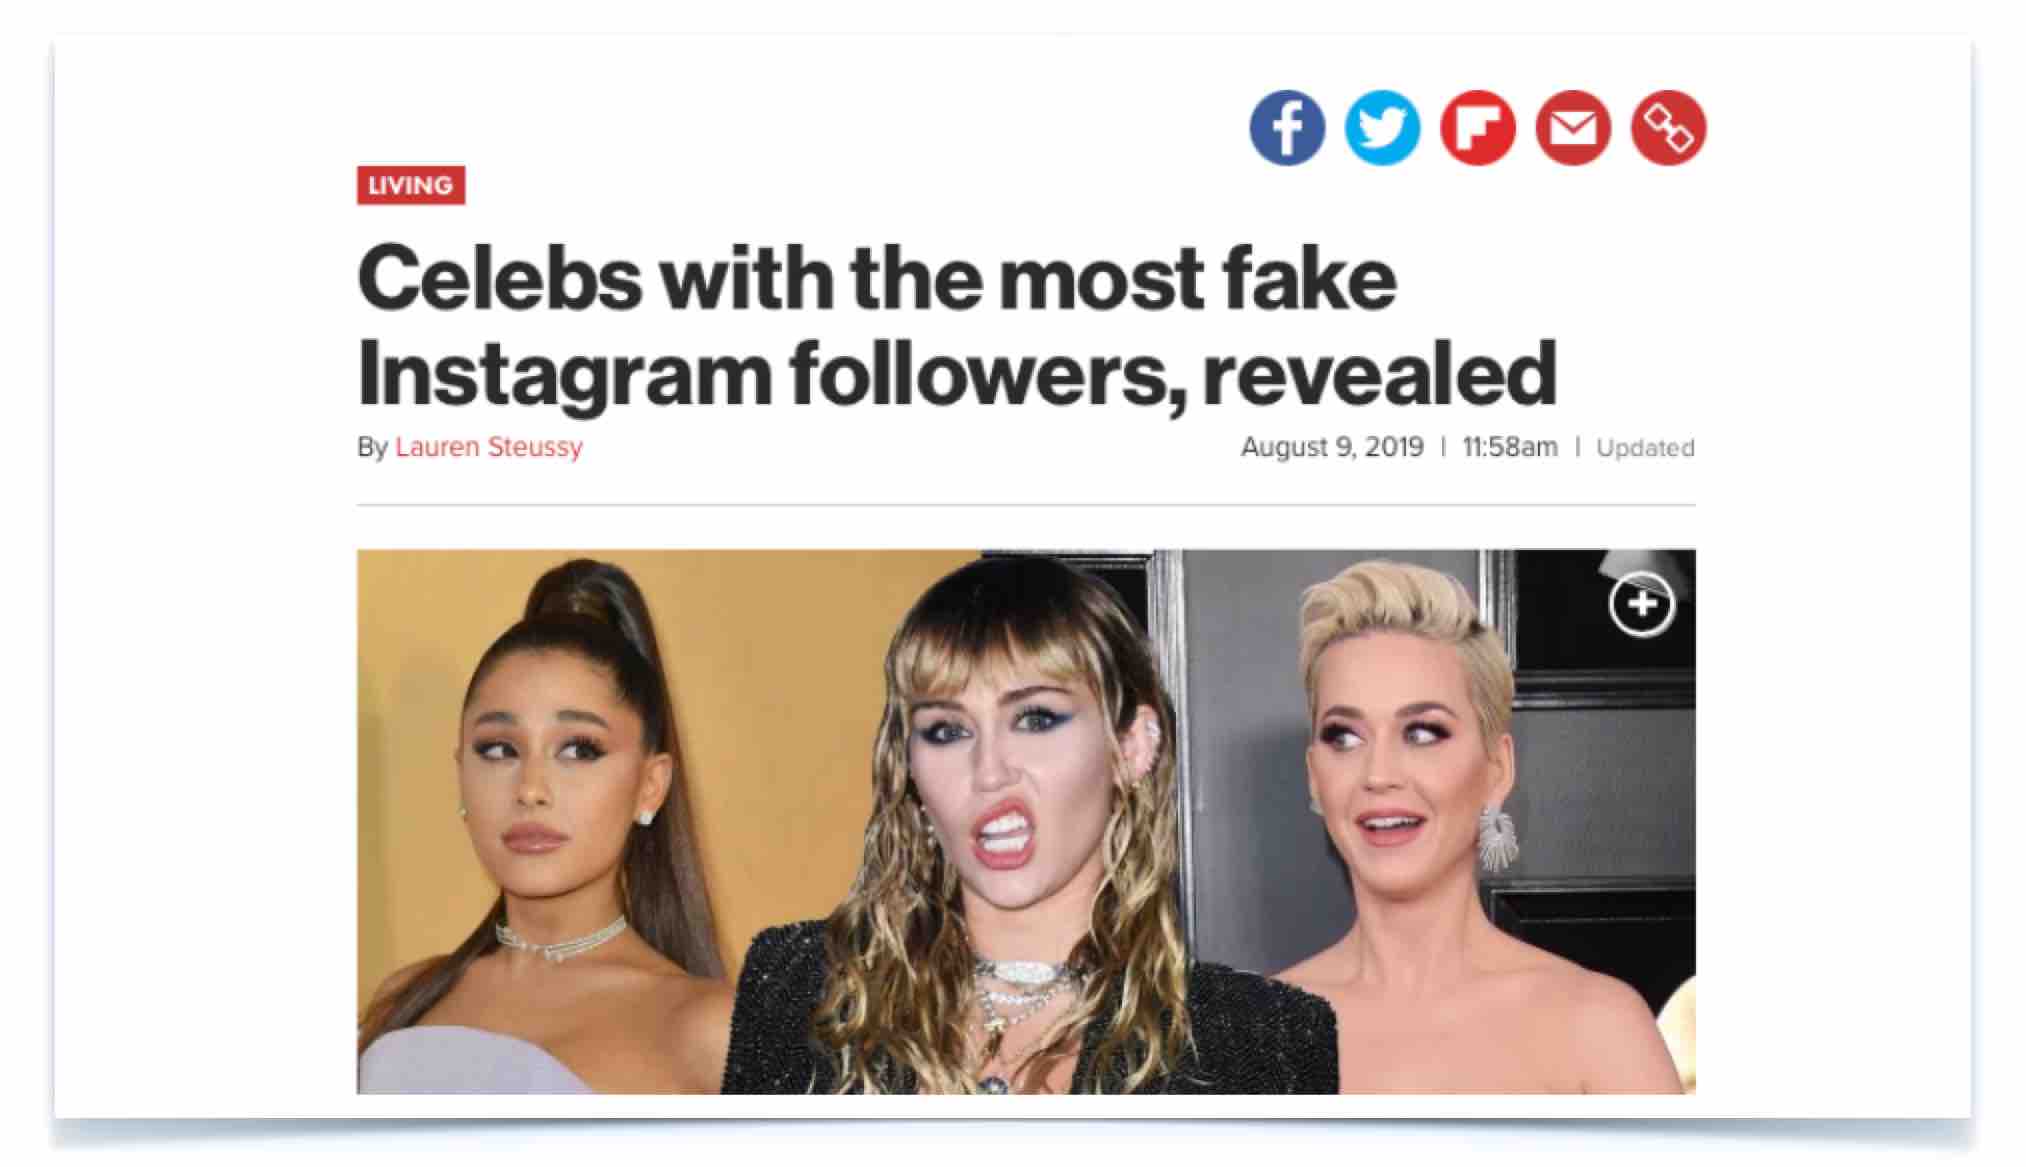 Celebrities with fake followers 